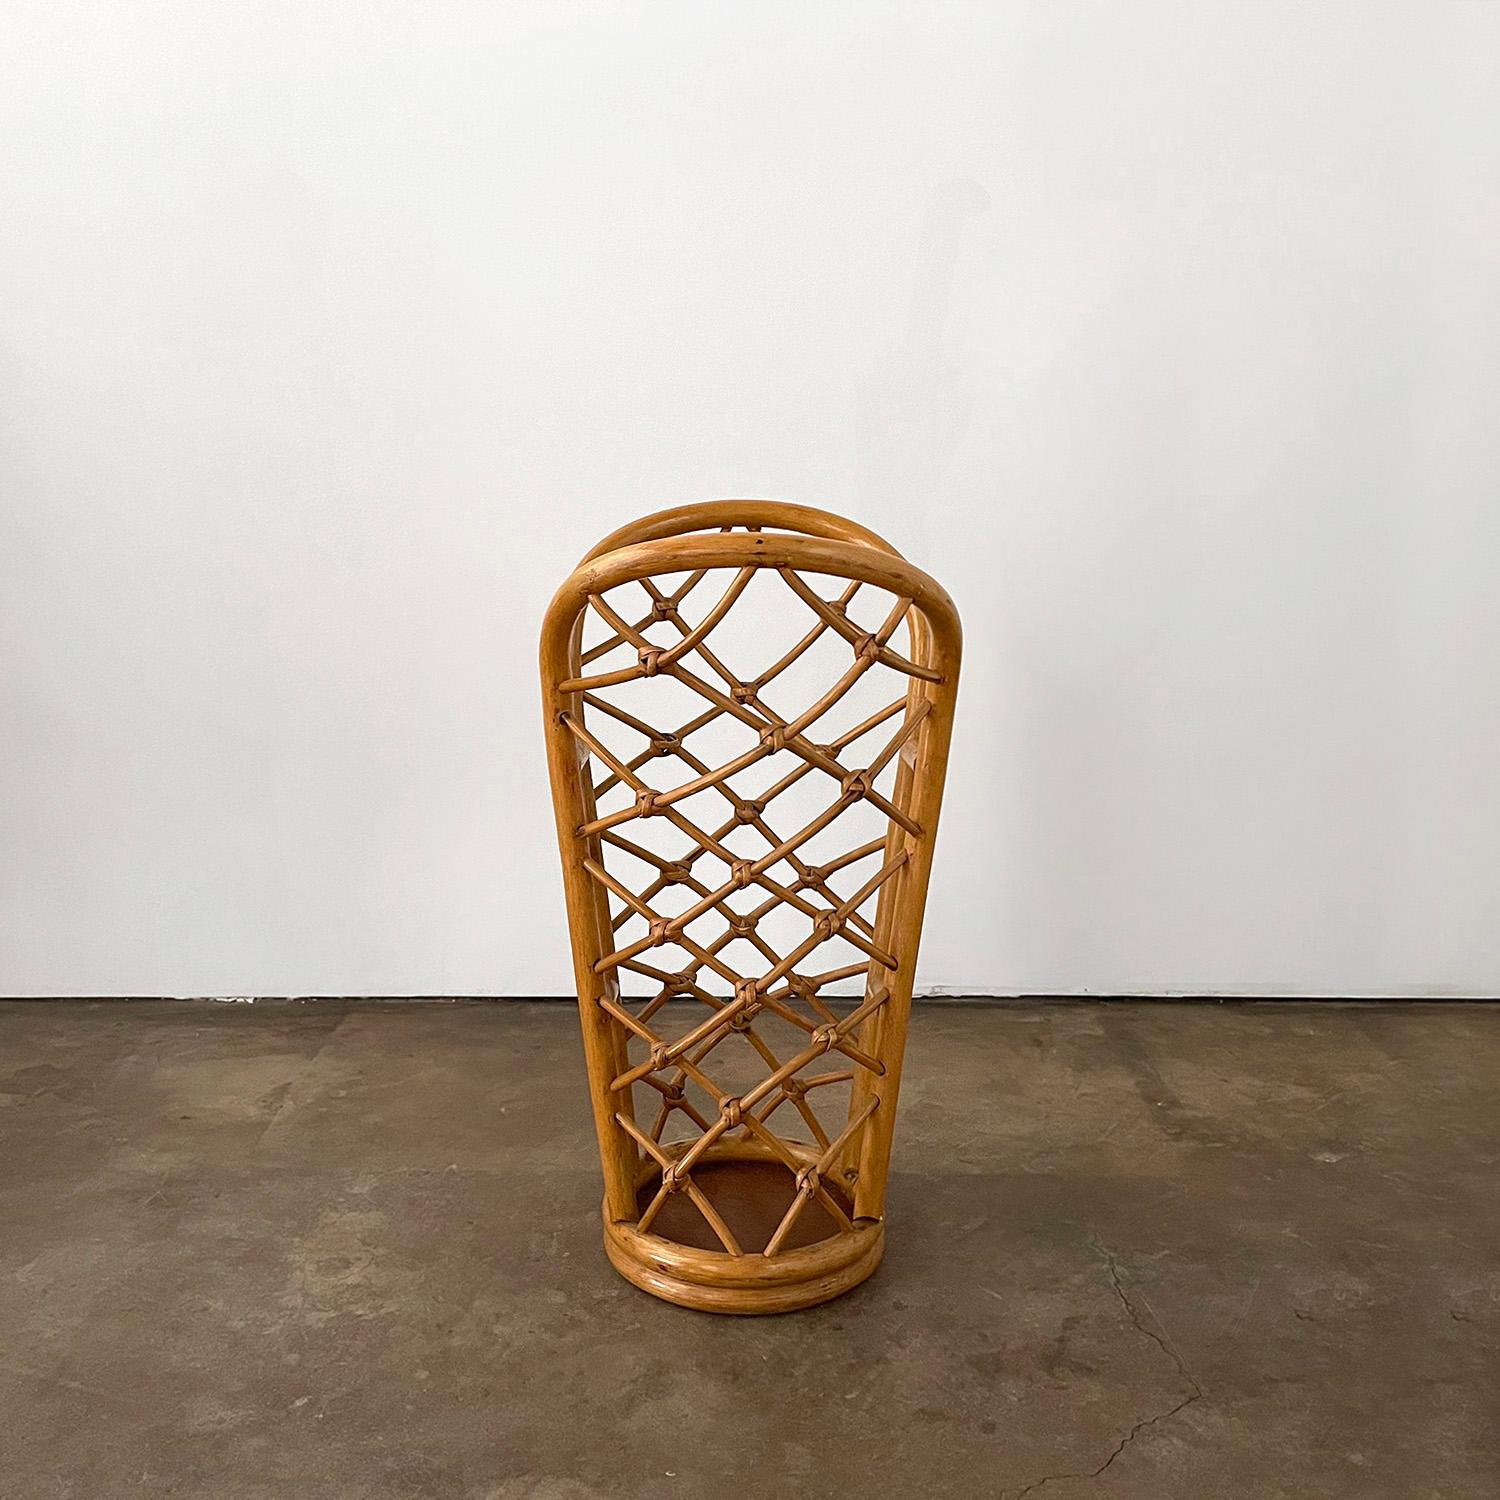 Italian bamboo and rattan umbrella holder 
Sculptural piece
Interlocking woven details with hand tied knots 
Great form and function
Beautifully constructed piece.